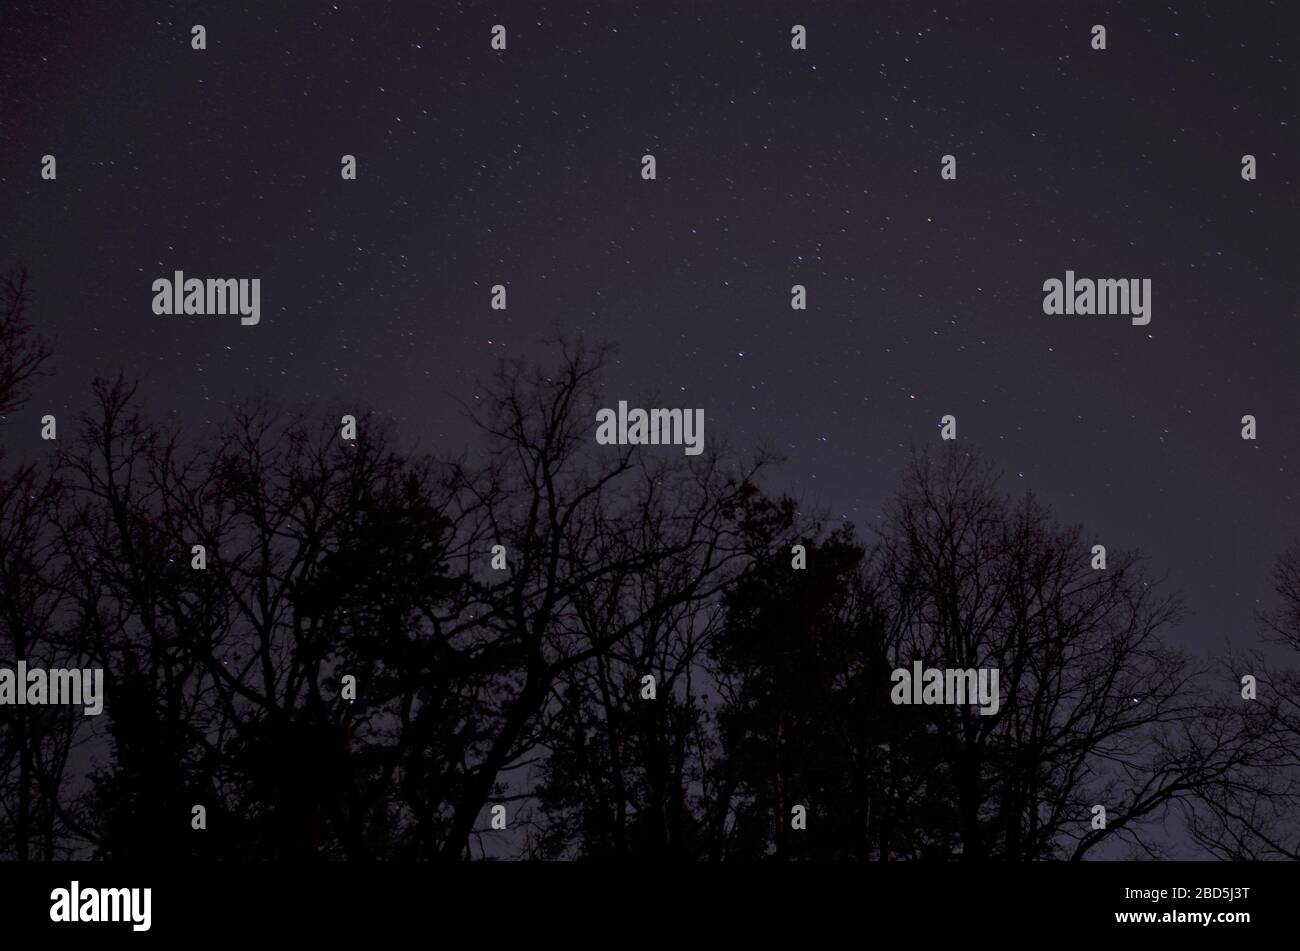 black tree silhouettes in the night sky with stars Stock Photo